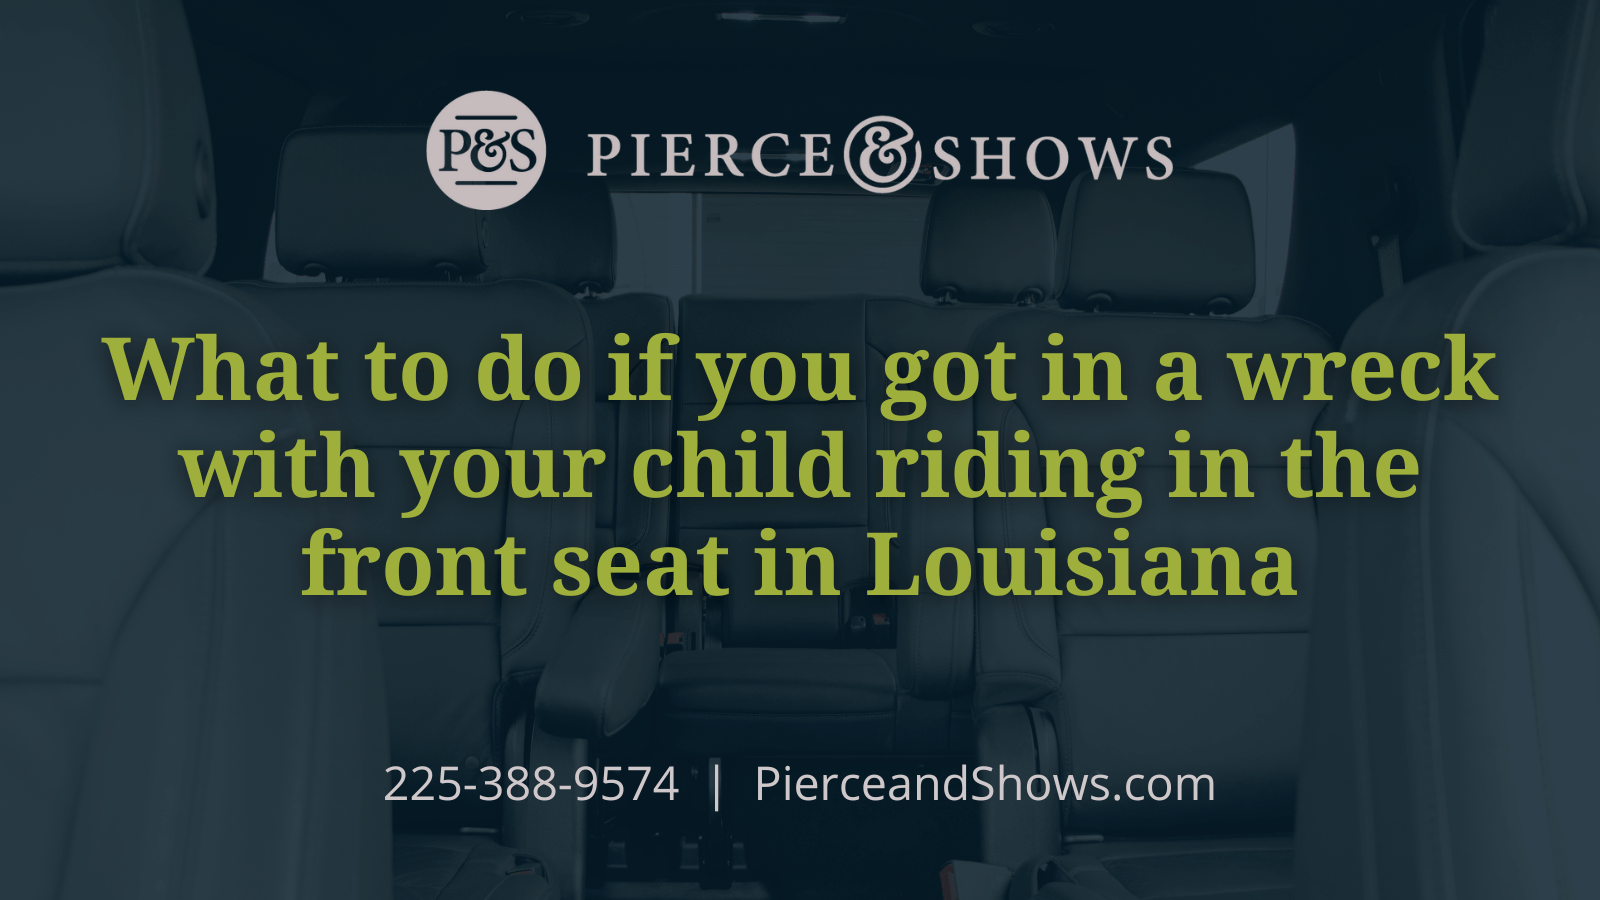 What to do if you got in a wreck with your child riding in the front seat in Louisiana - Baton Rouge Louisiana injury attorney Pierce & Shows